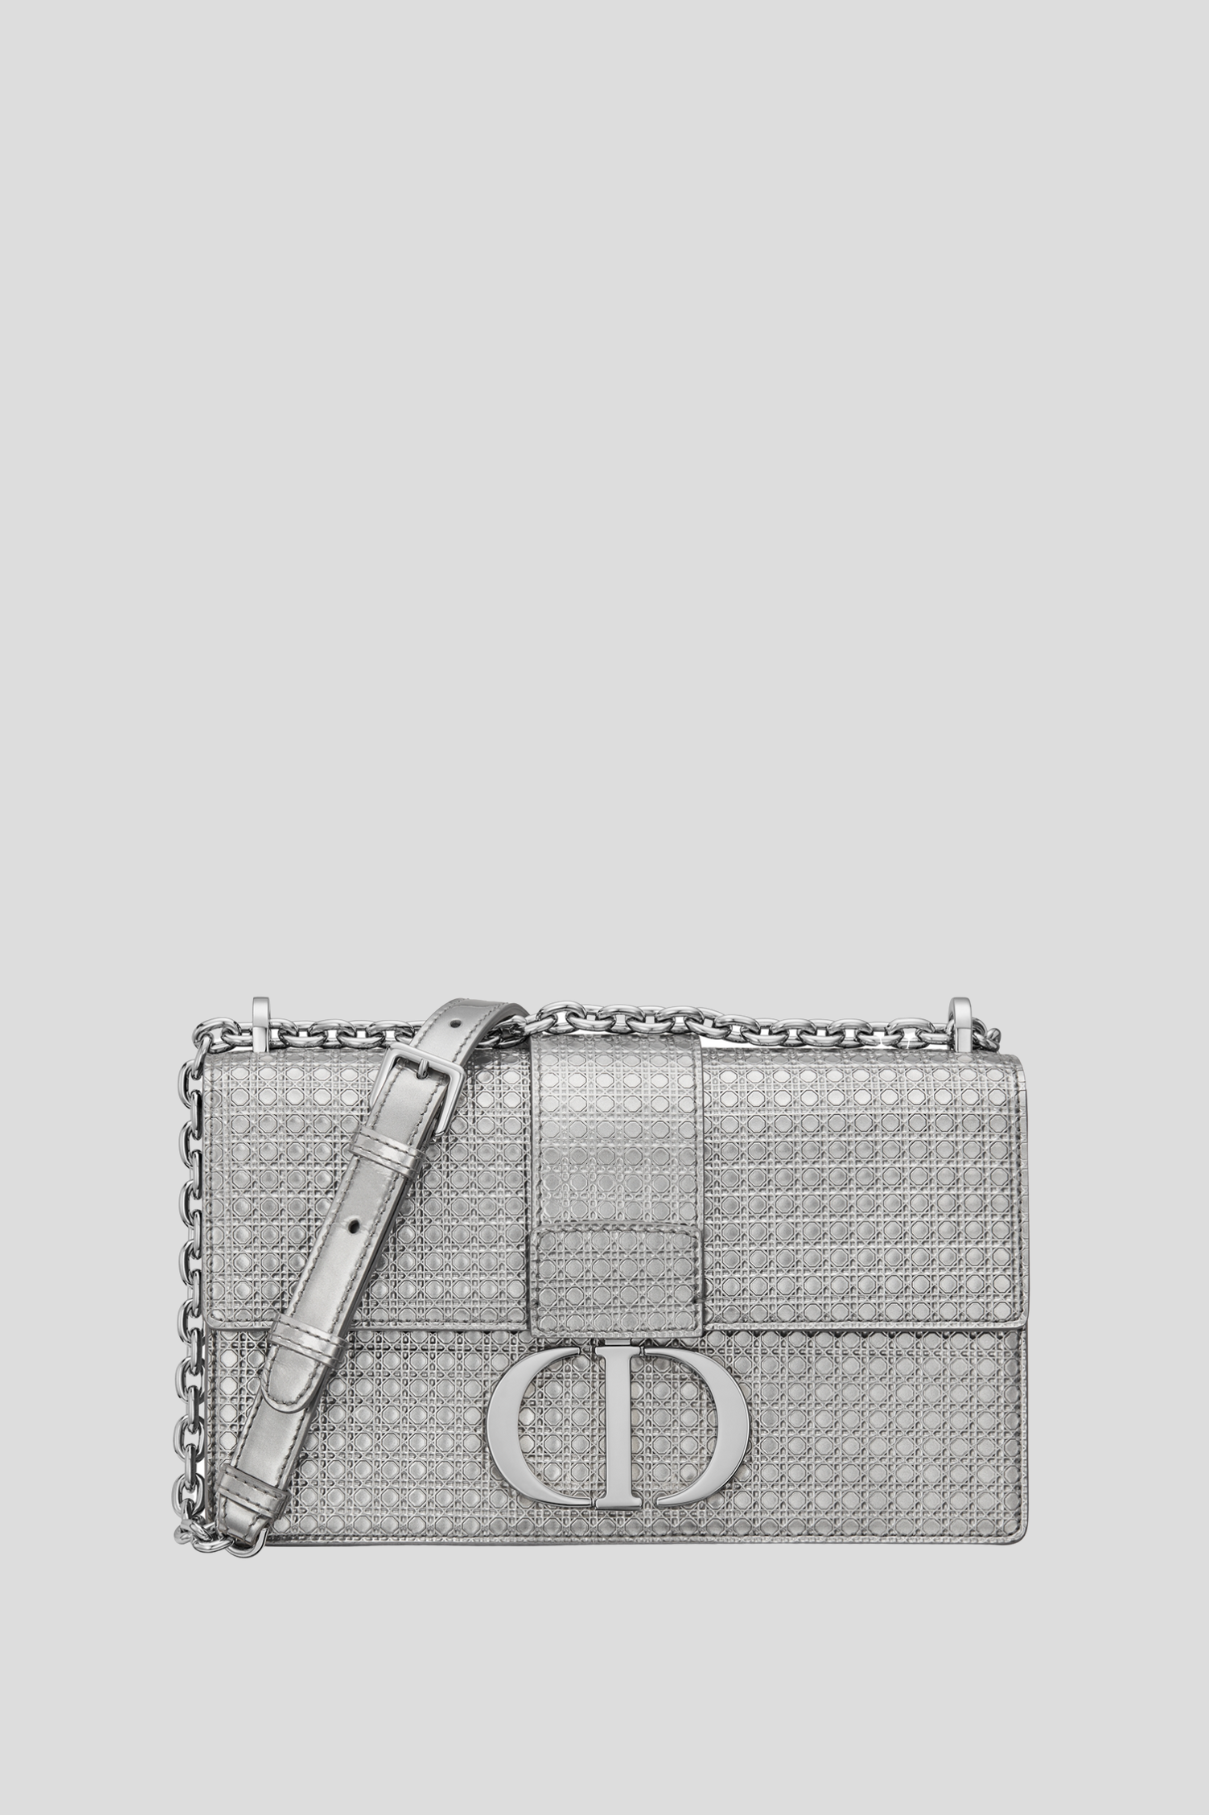 Eccentrico Bags - Guess Tote book bag 🎈🎈Inspired by Dior Shop